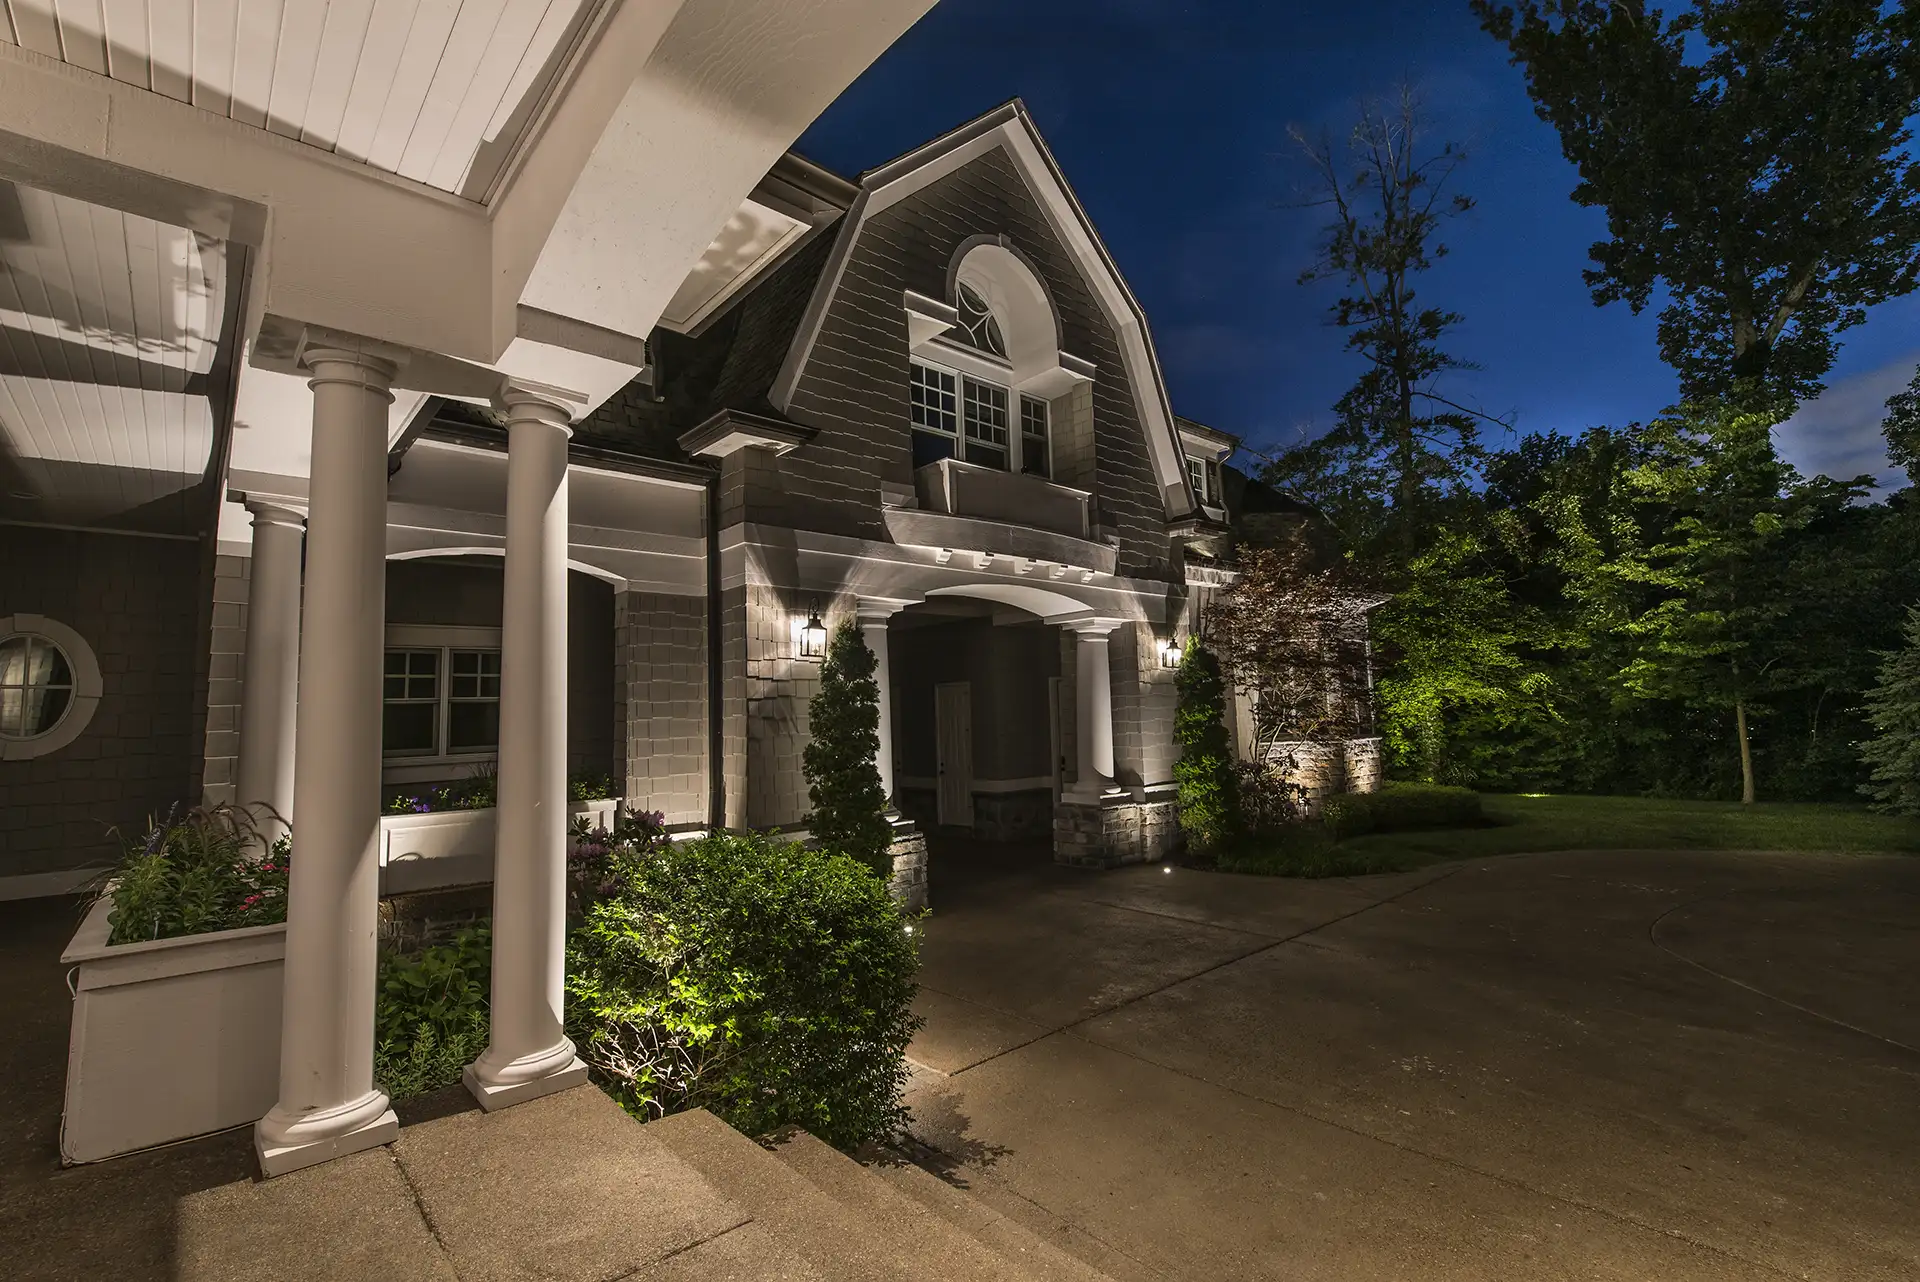 Weinberger residence image 2 portico driveway Lighthouse Outdoor Lighting and Audio Indianapolis, IN